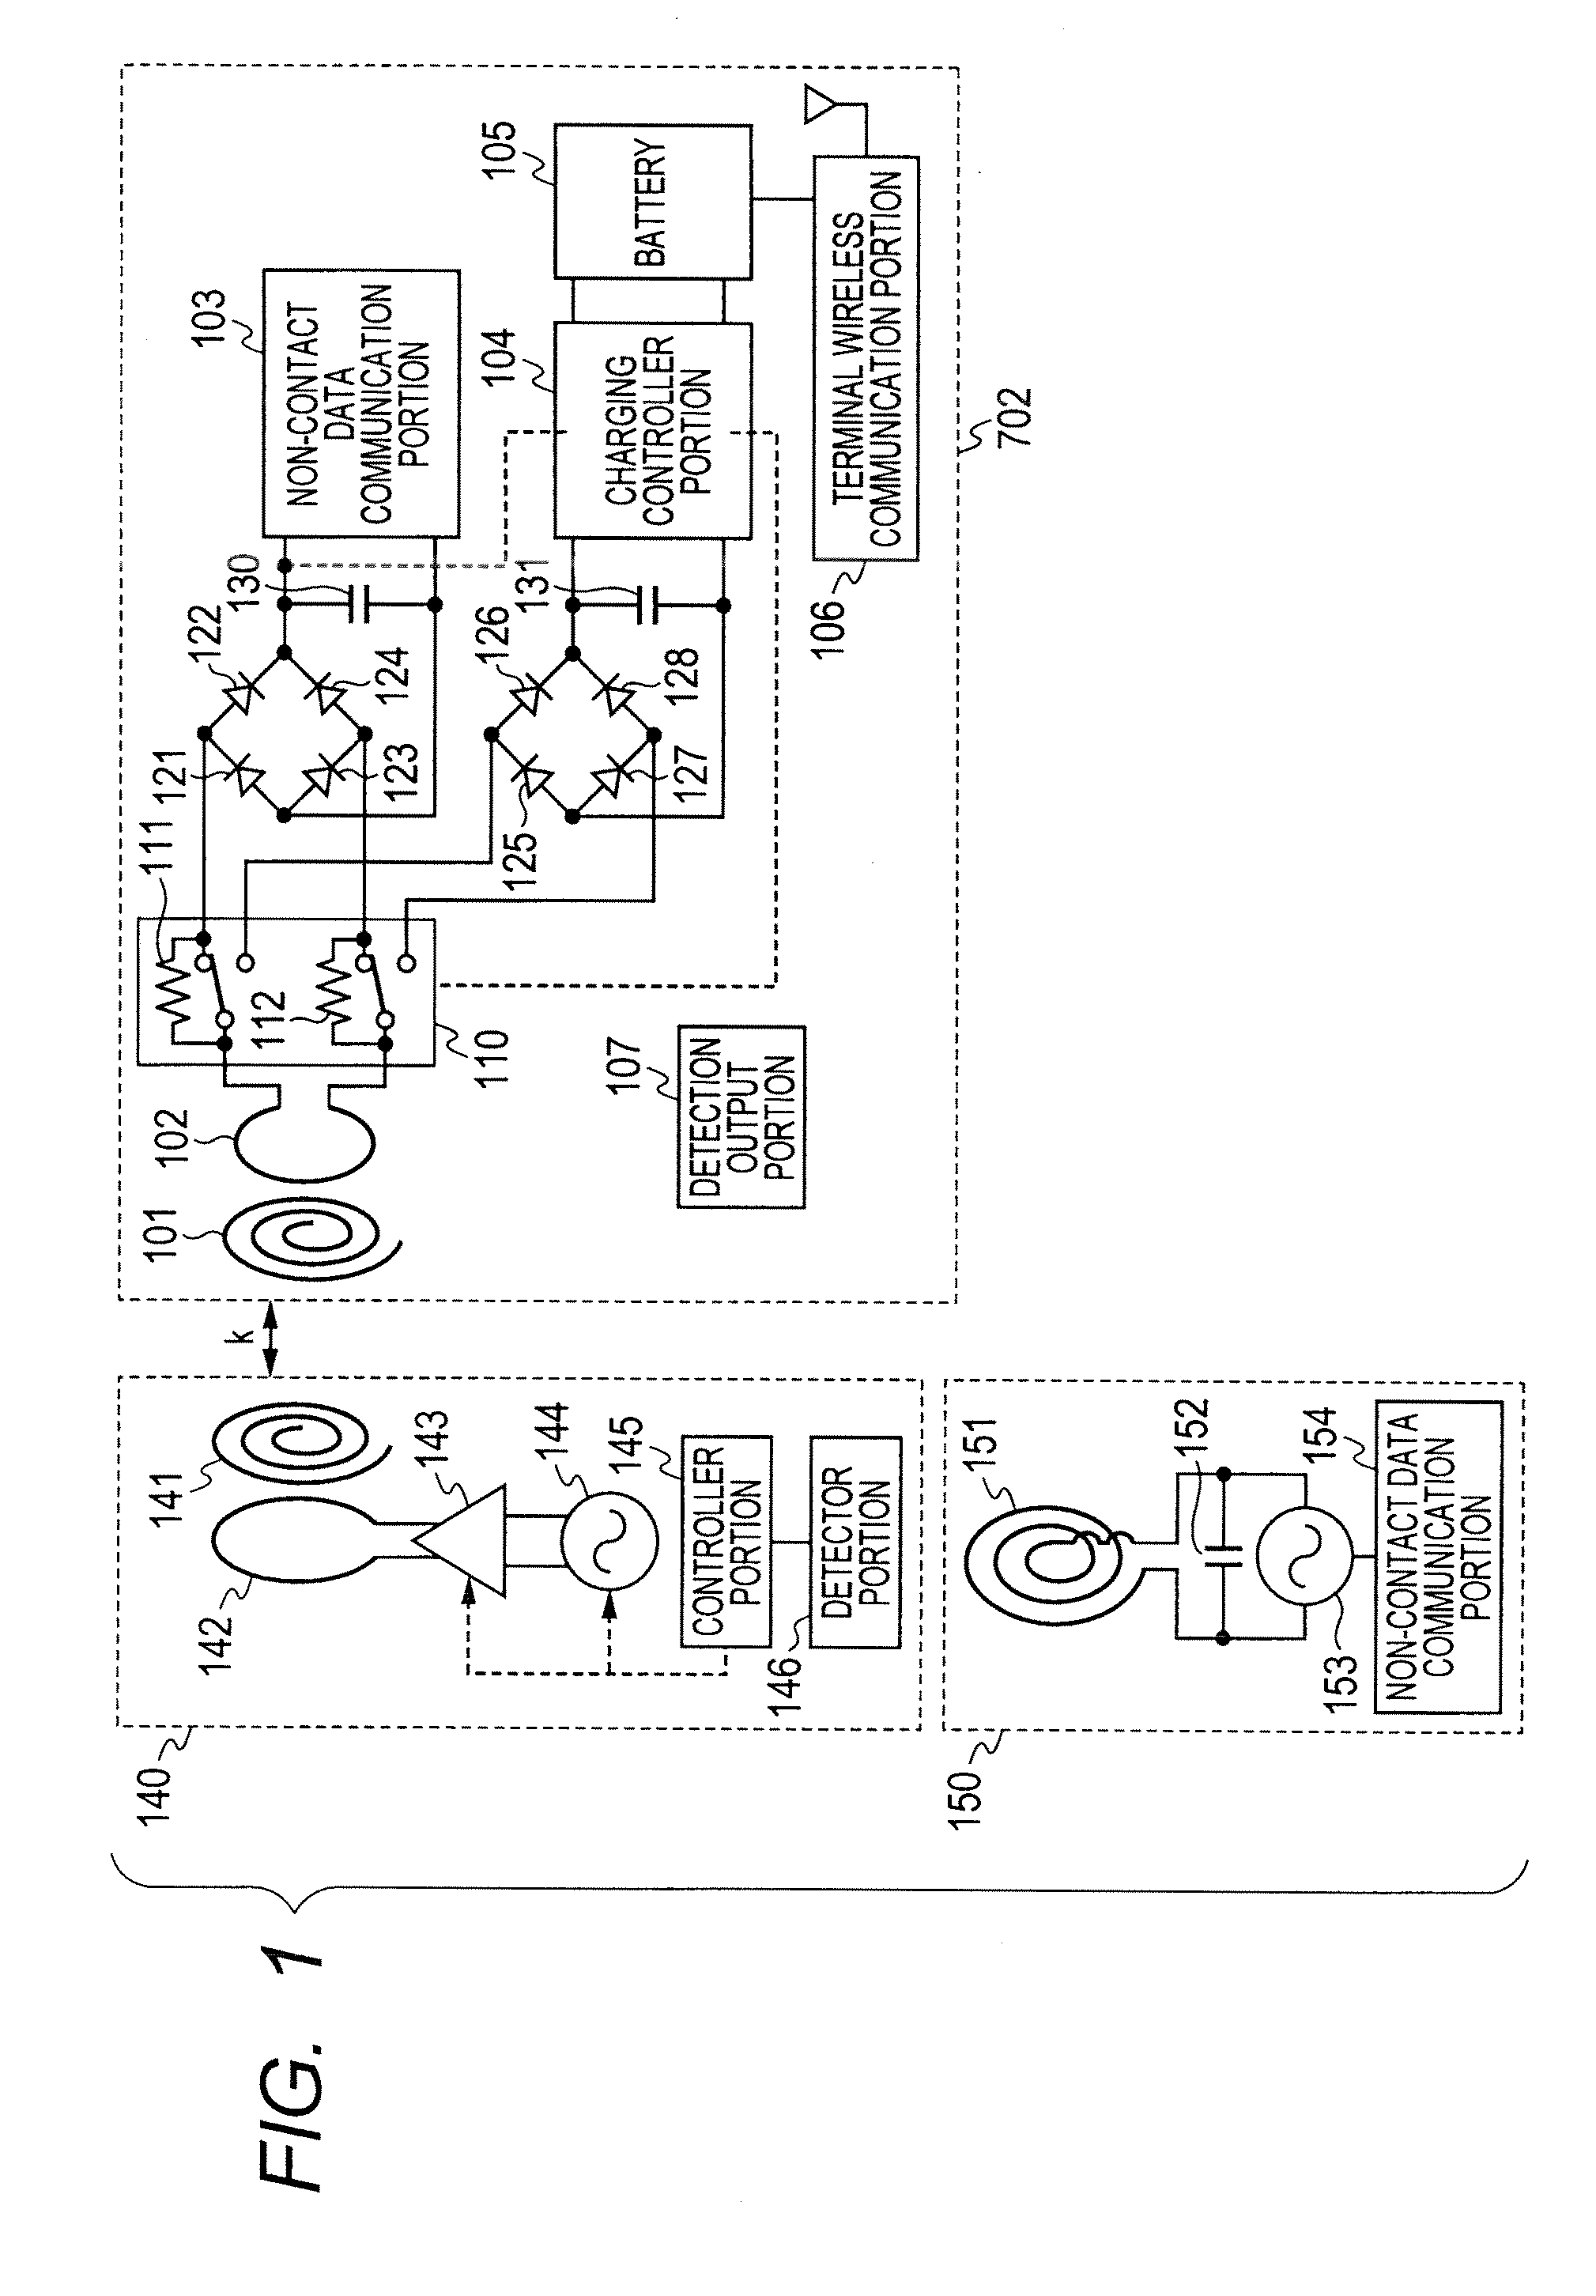 Non-contact power transmission system, receiving apparatus and transmitting apparatus